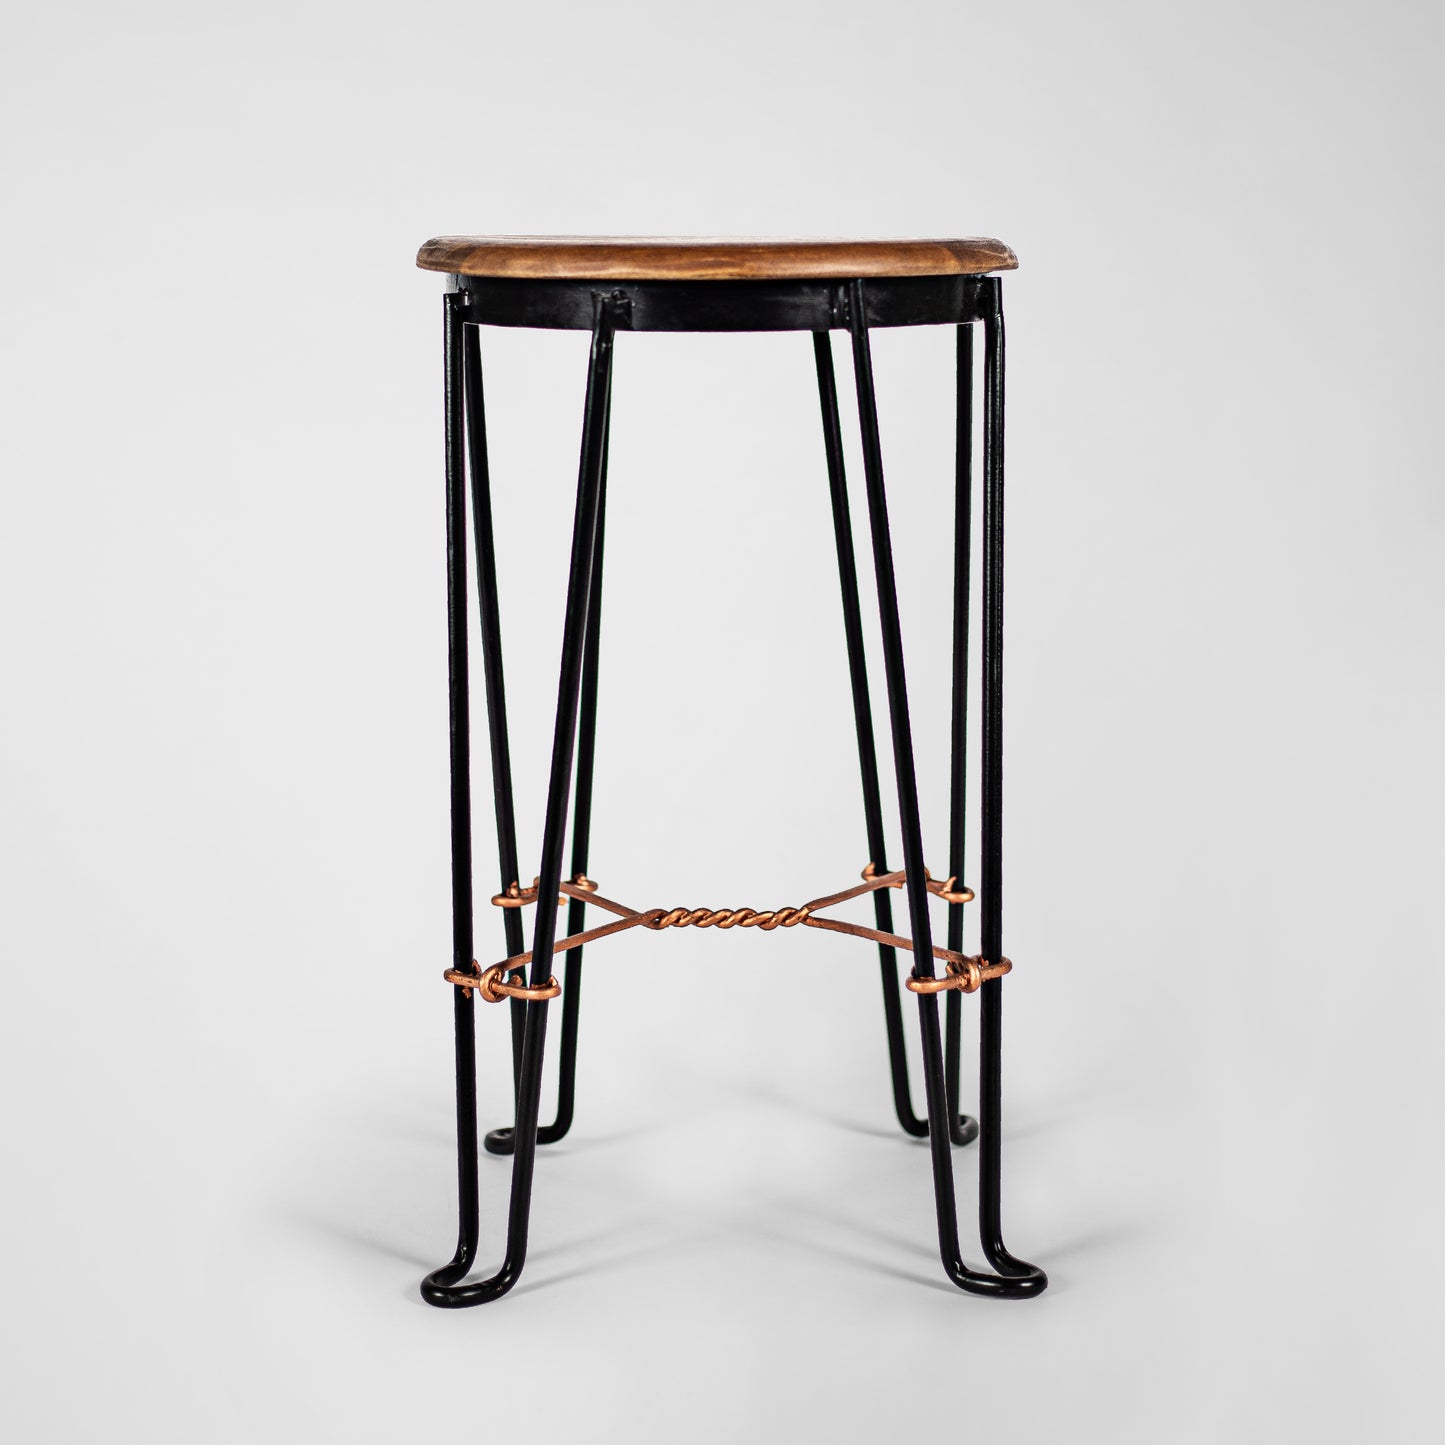 Tony Twister – Handmade industrial design stool made of metal with wooden seat in black and copper